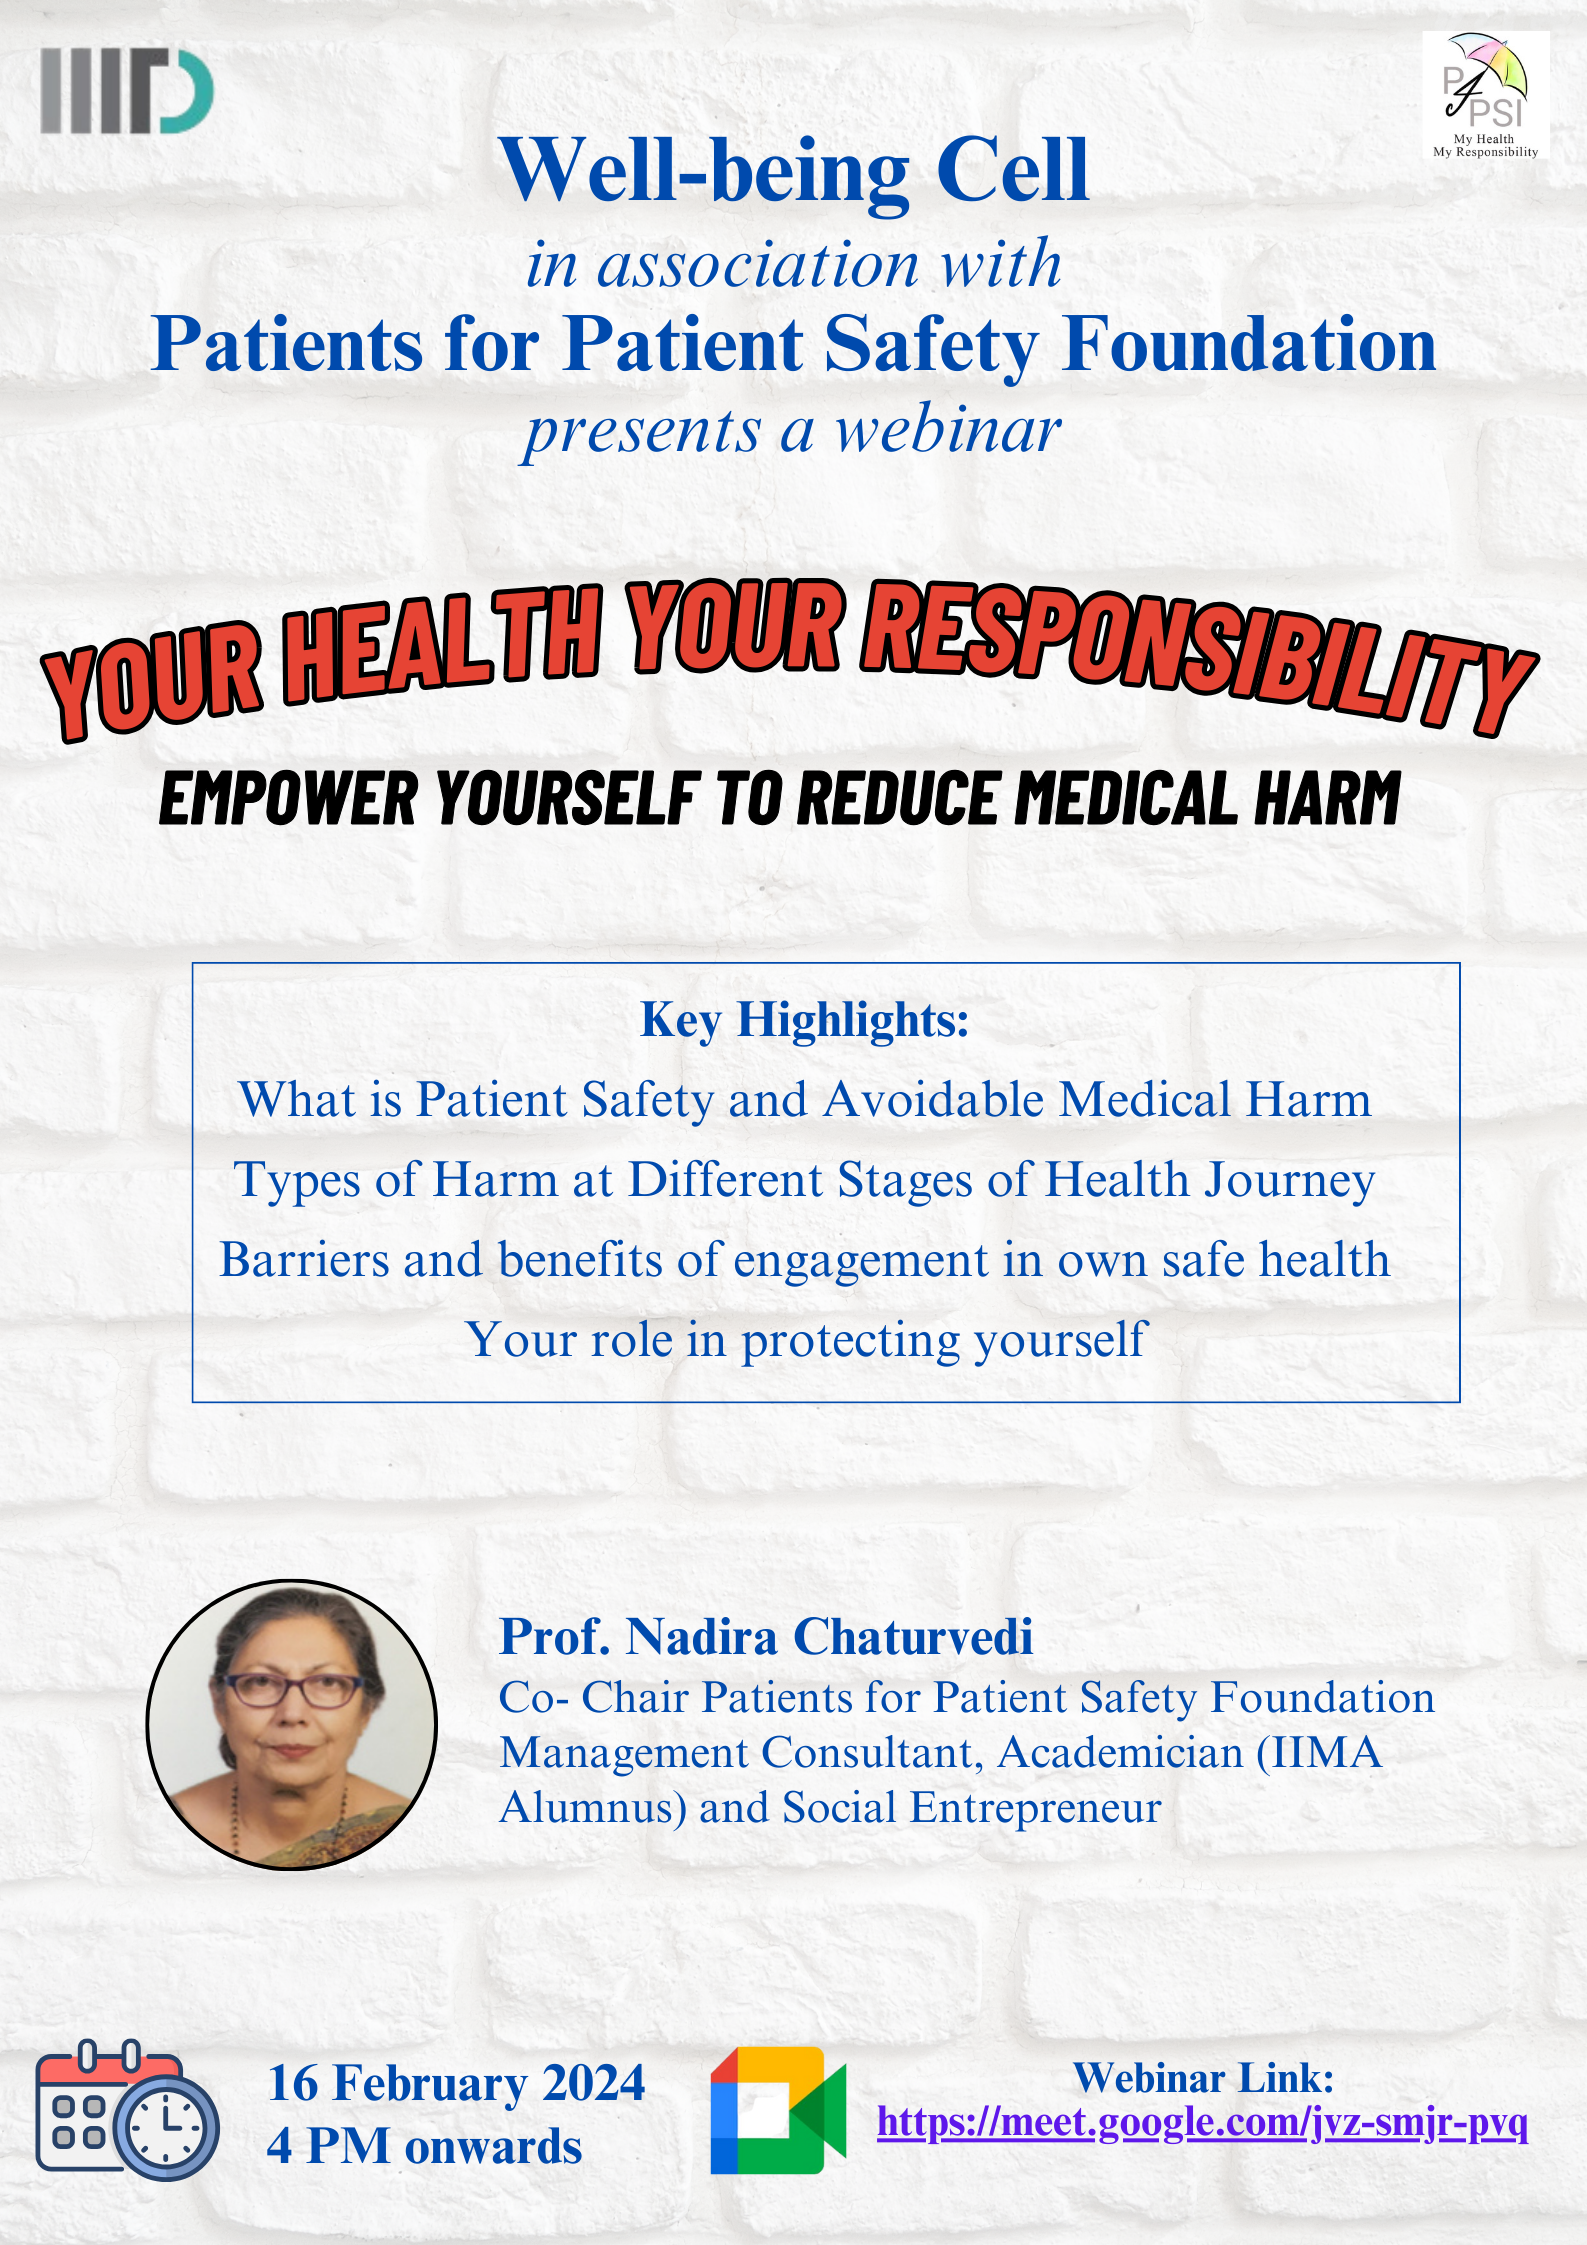 Webinar on YOUR HEALTH YOUR RESPONSIBILITY: EMPOWER YOURSELF TO REDUCE MEDICAL HARM